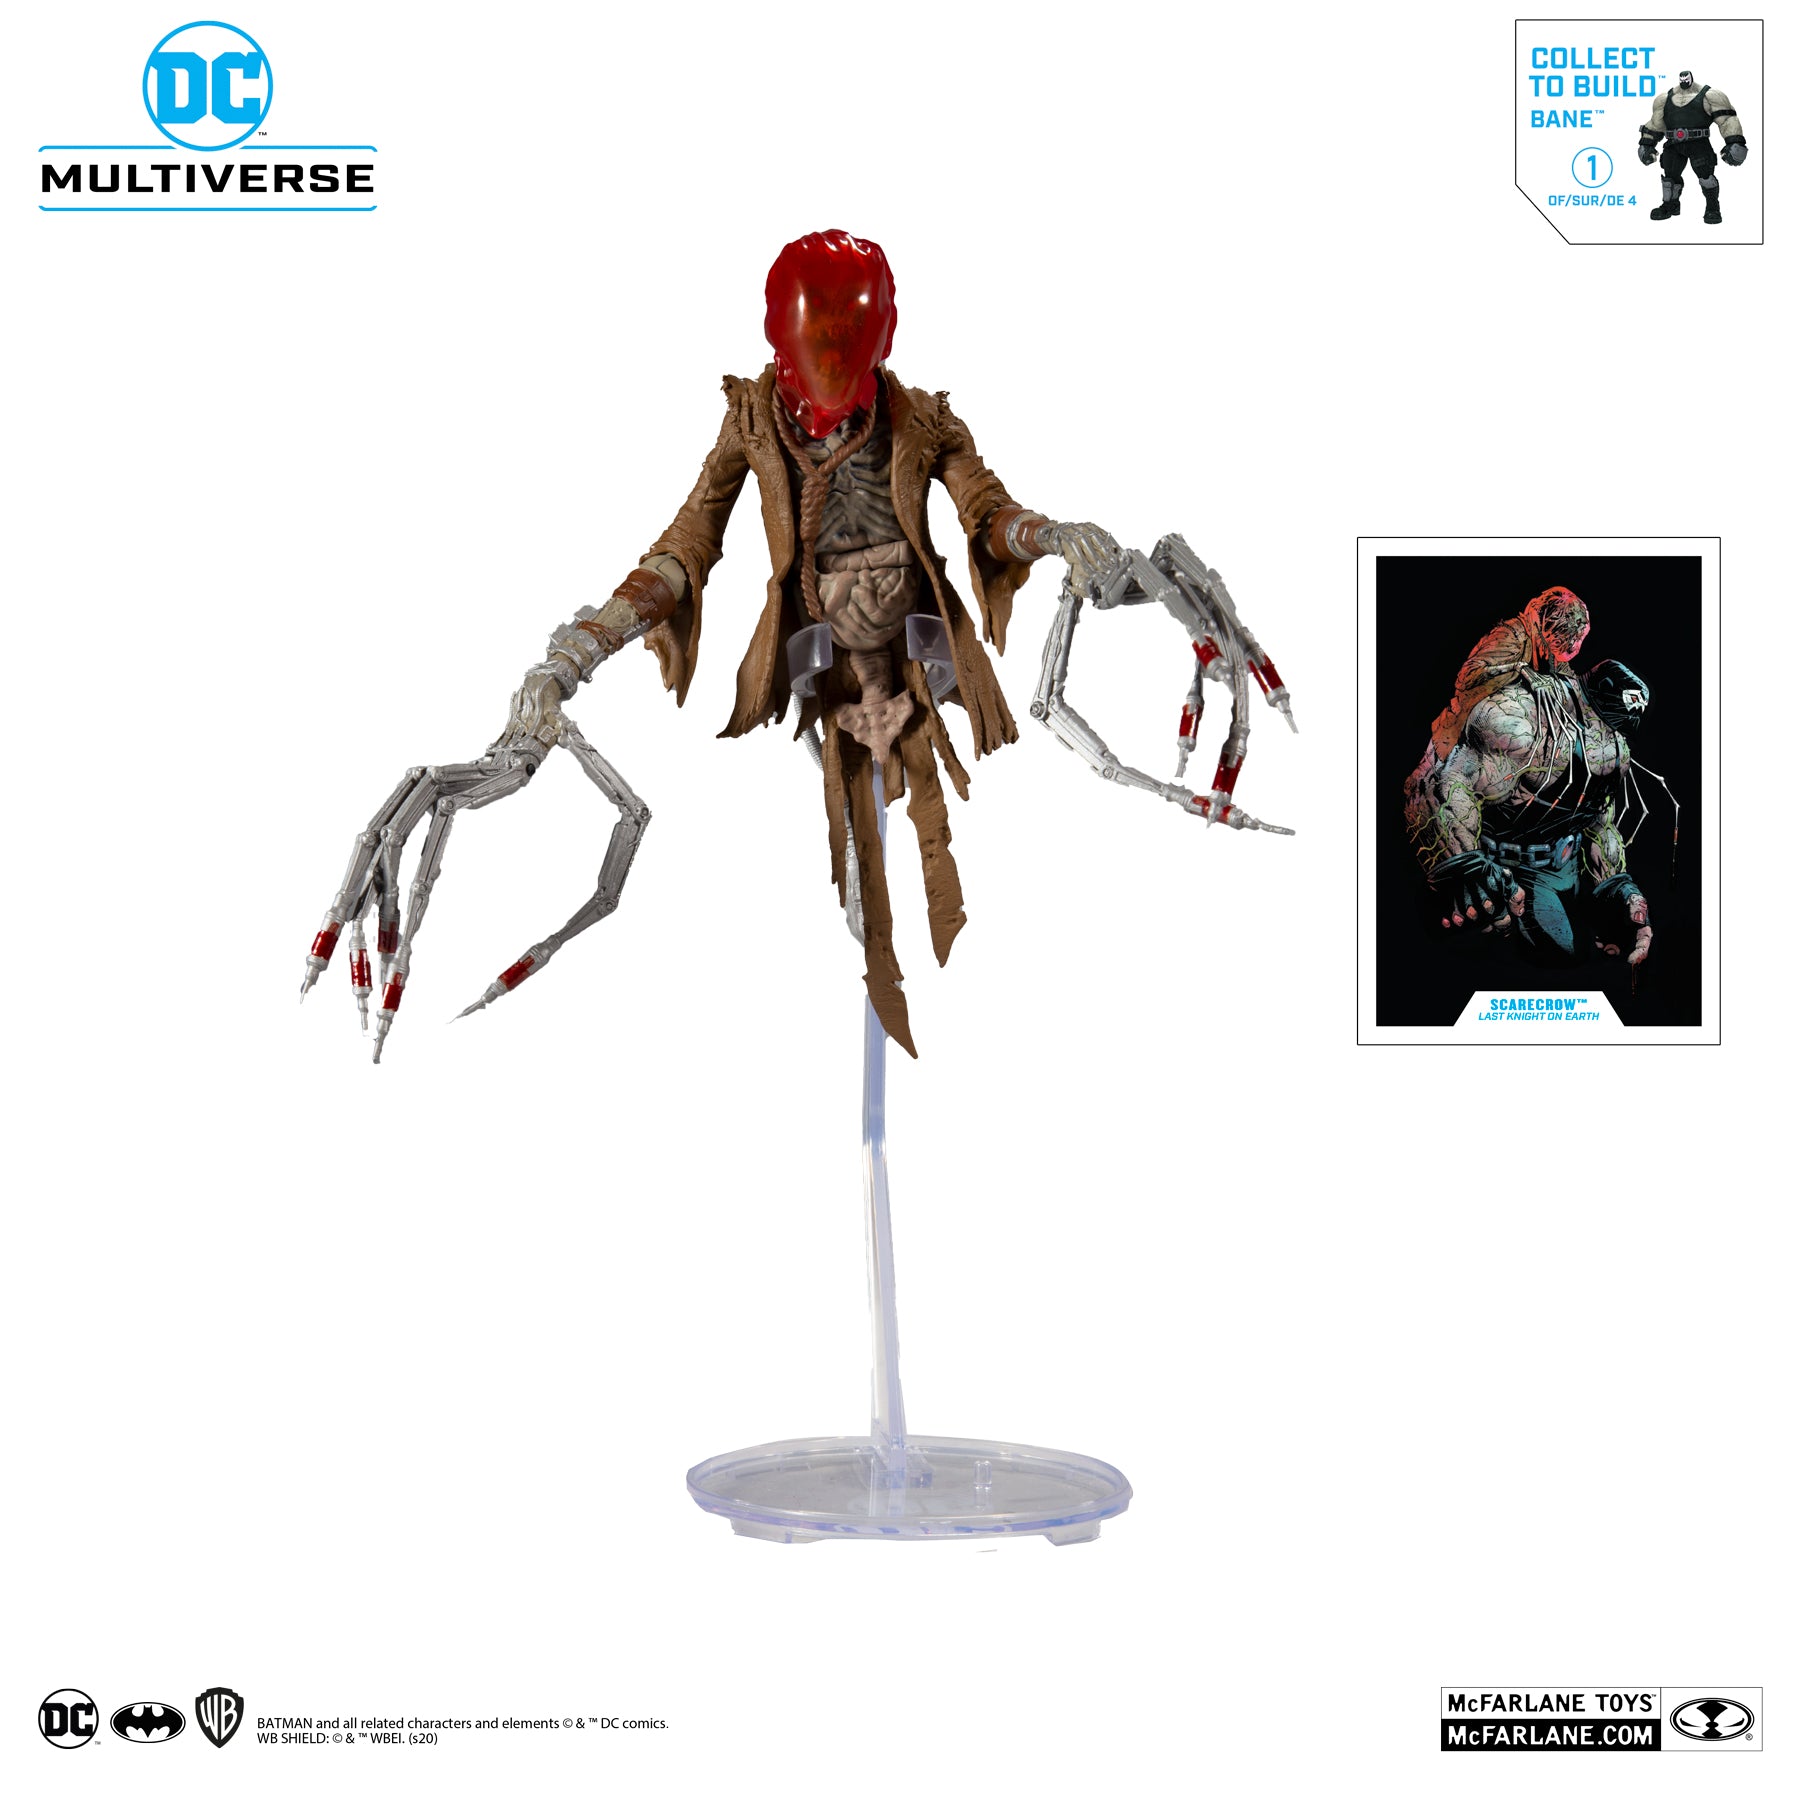 DC Multiverse Scarecrow Last Knight on Earth Build-a Bane - McFarlane Toys